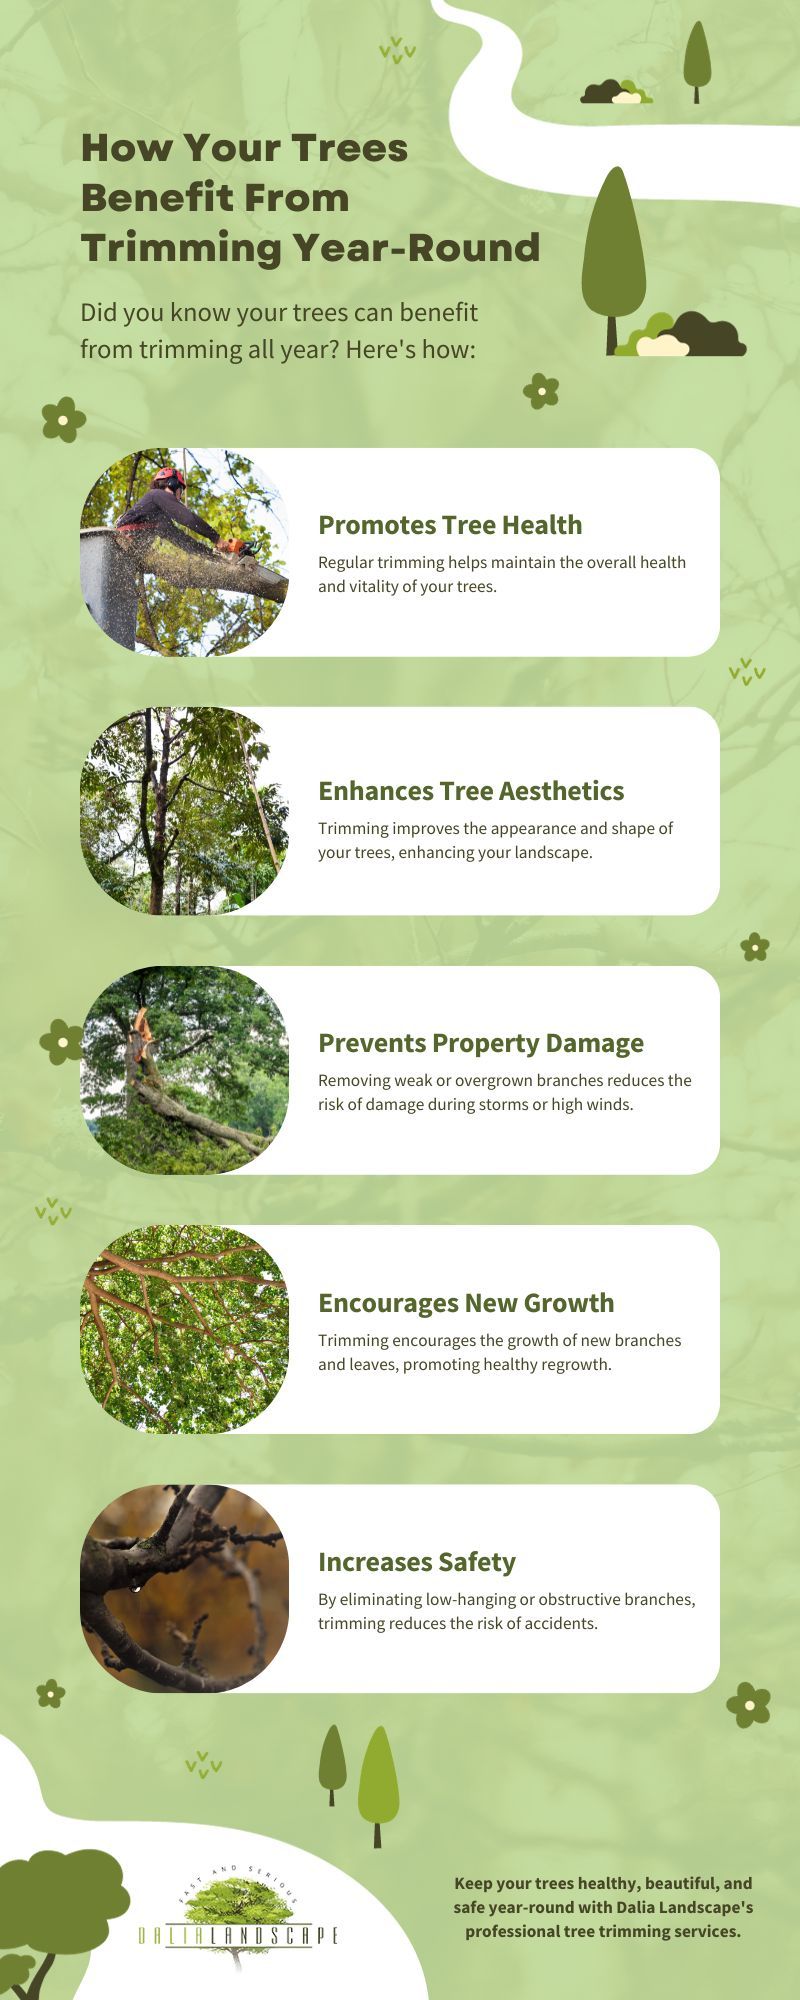 How Your Trees Benefit From Trimming Year-Round